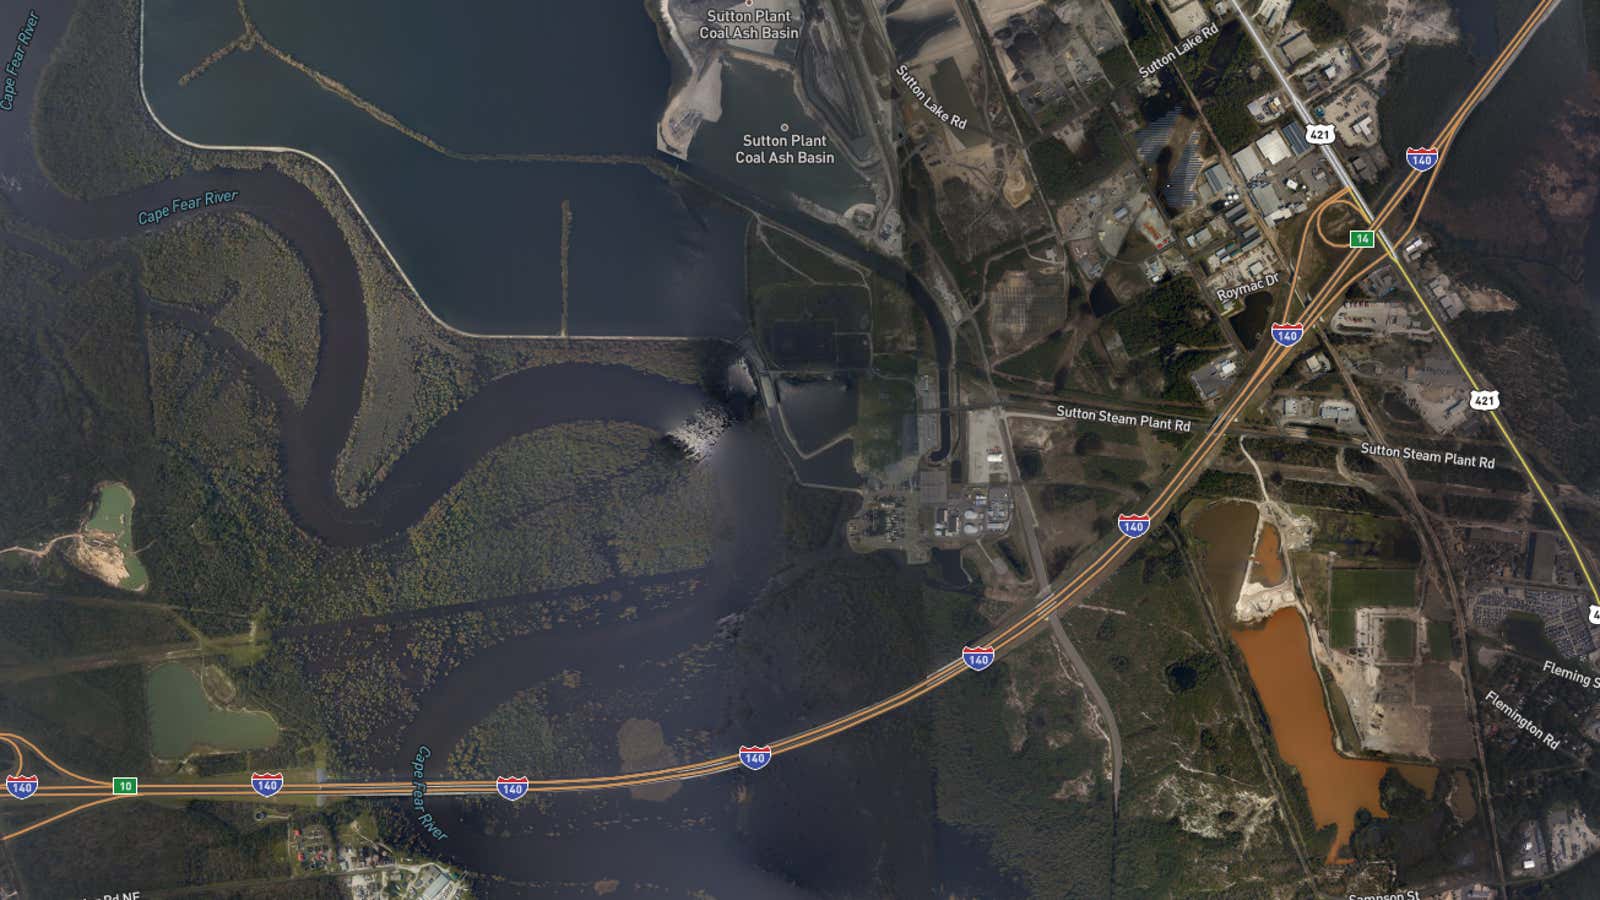 An image captured on Sept. 20 by the US National Oceanic and Atmospheric Administration shows a coal ash basin and Sutton Lake flowing into Cape Fear River.